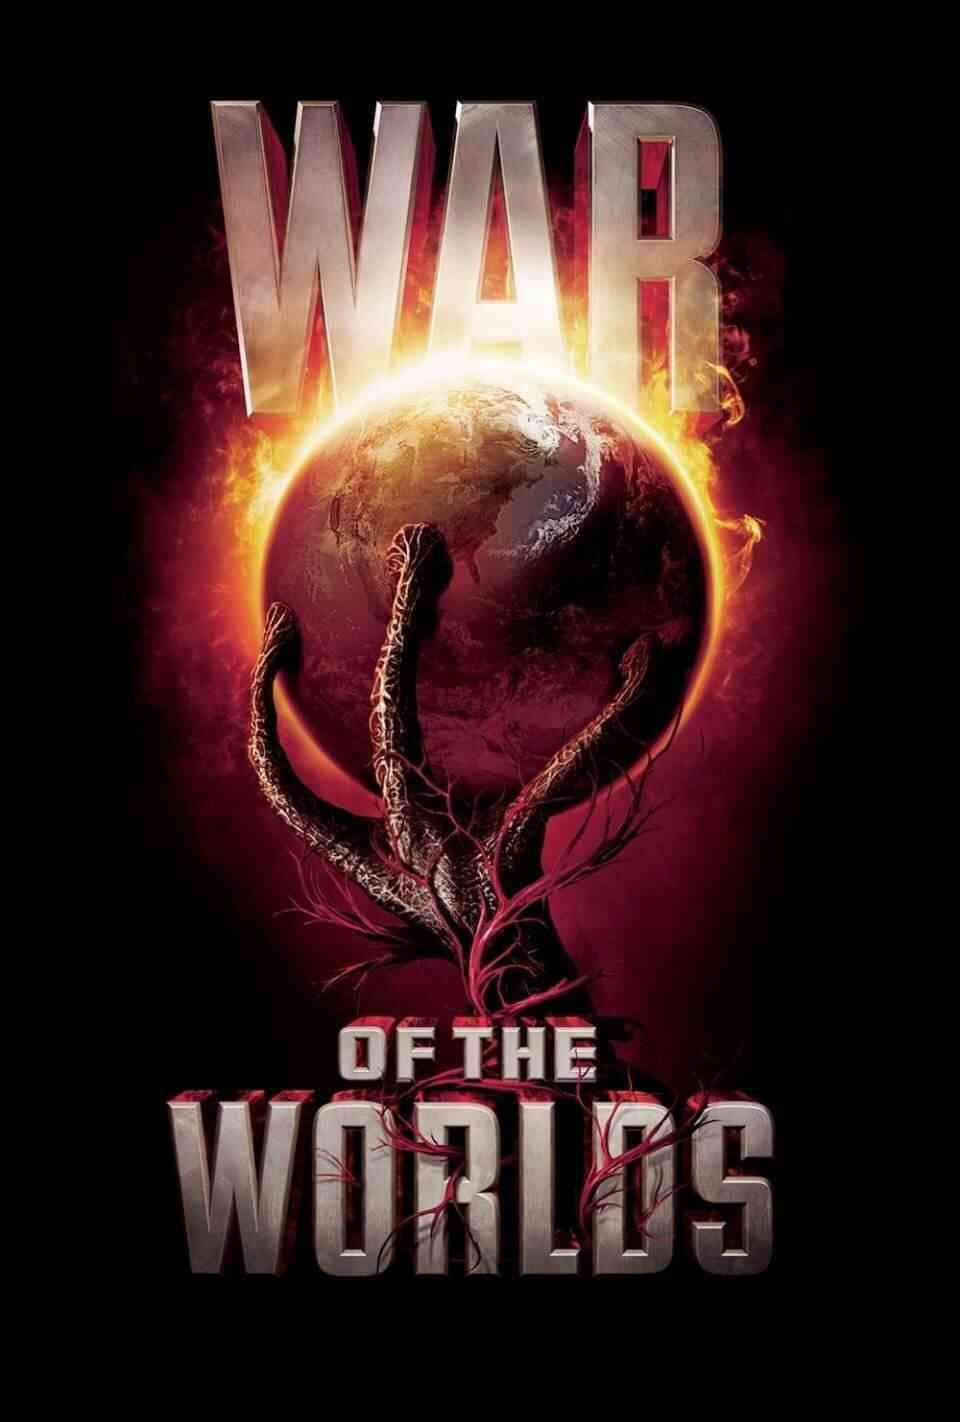 Read War of the Worlds screenplay (poster)